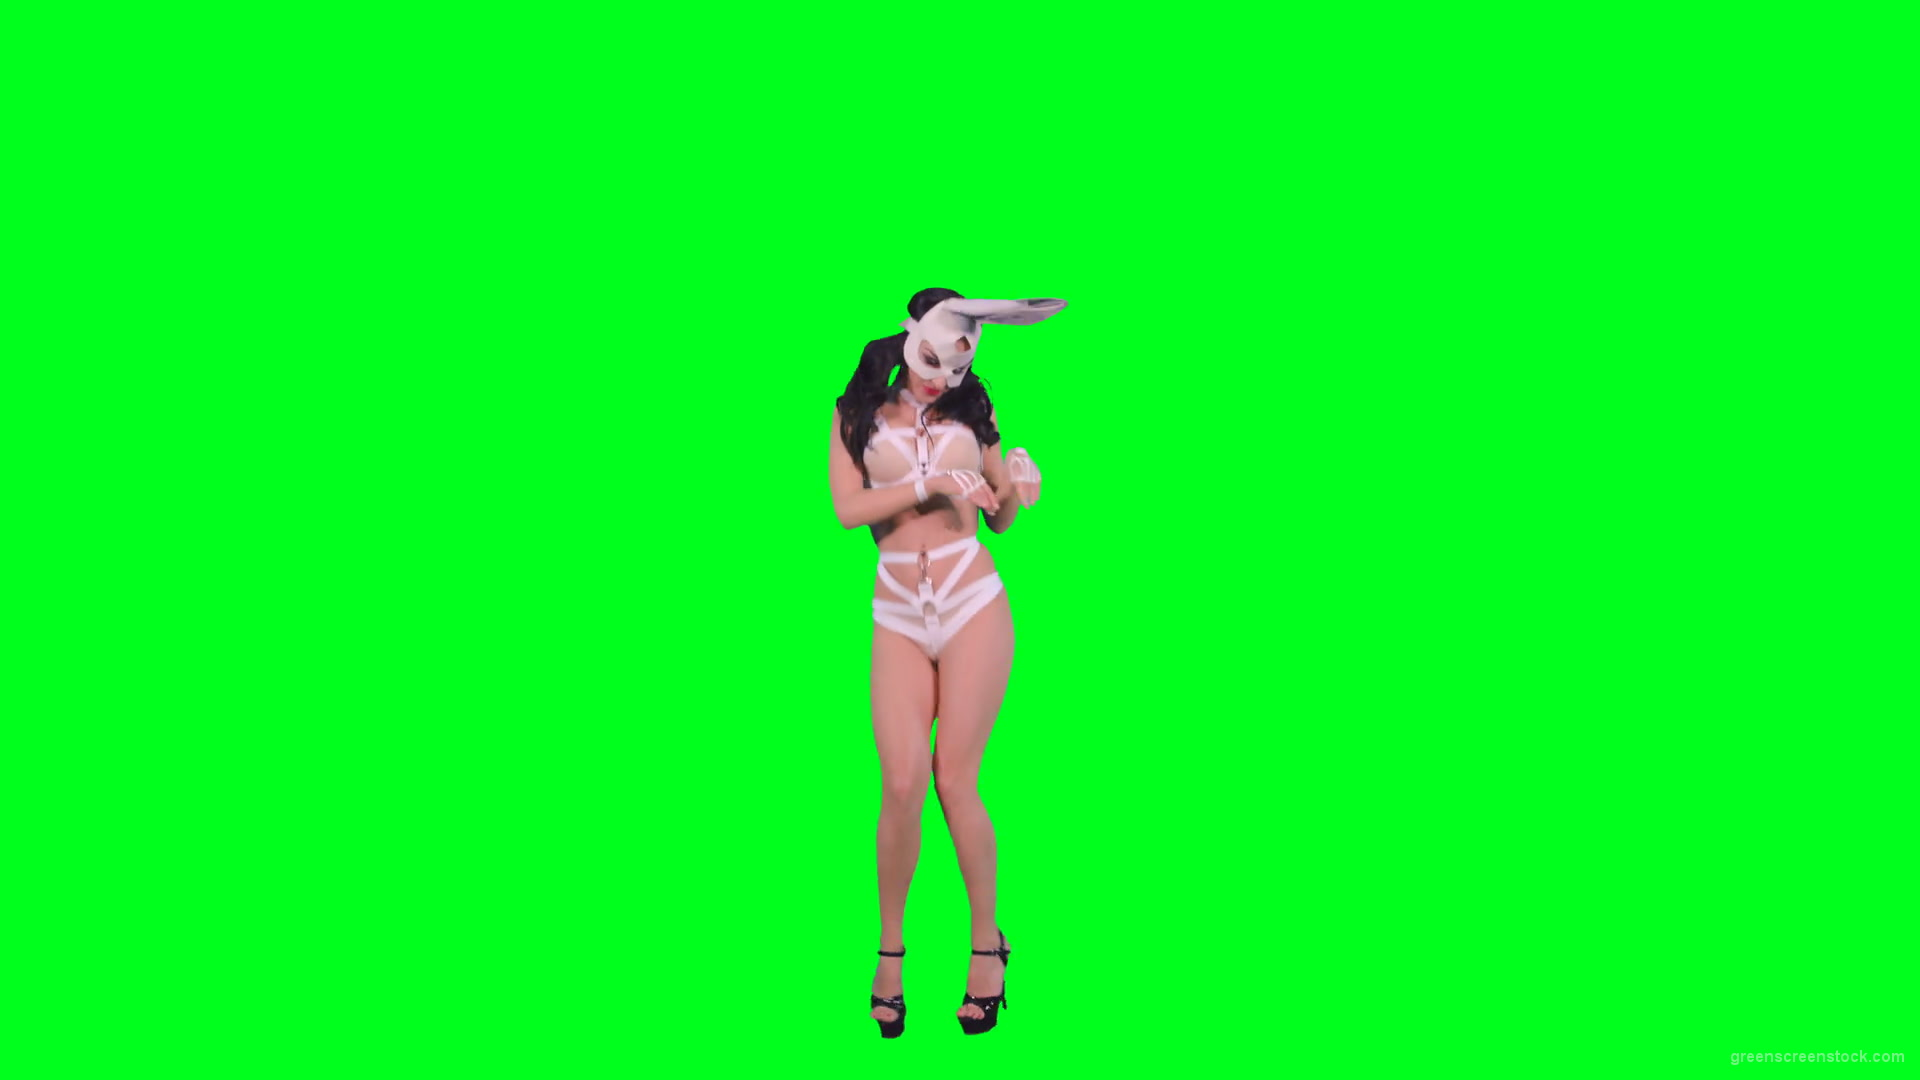 Hot-Go-go-Dancing-girl-is-jumping-over-green-screen-4K-Video-Footage-1920_004 Green Screen Stock